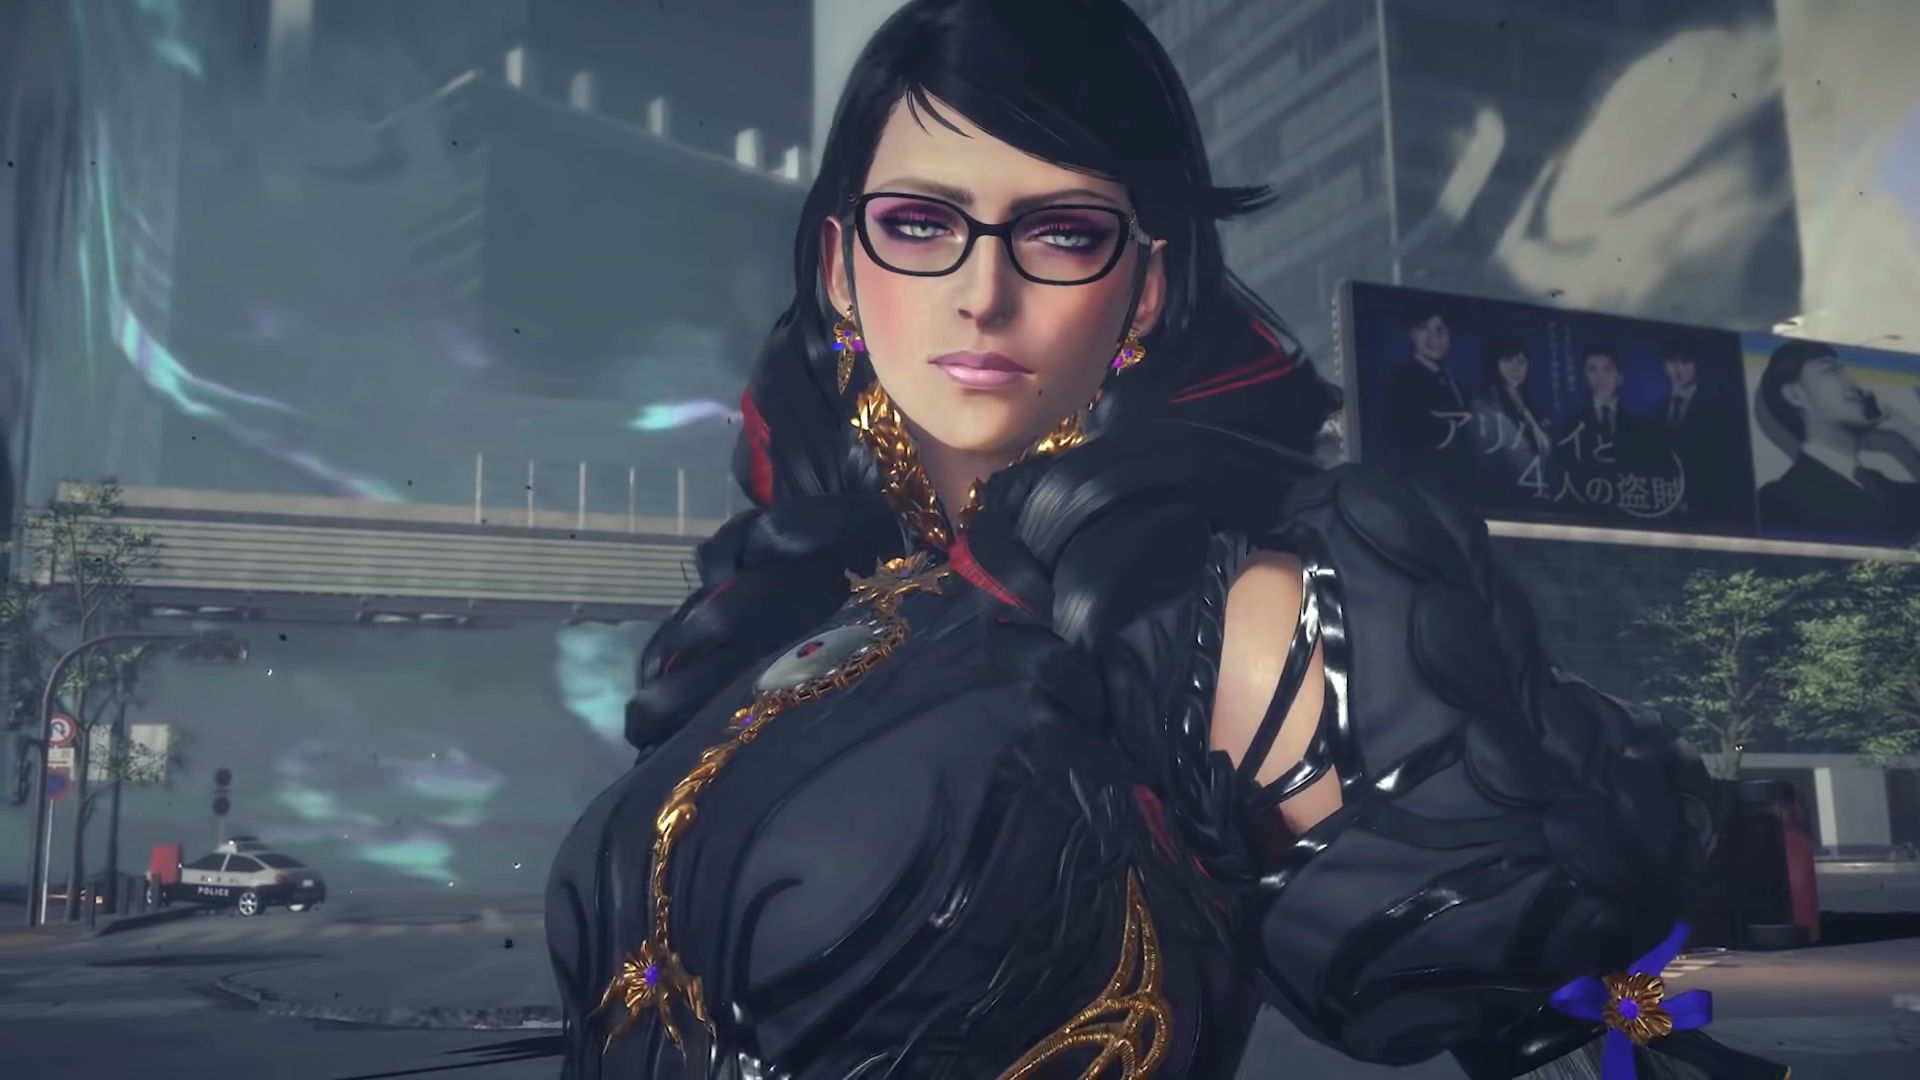 Bayonetta 3 Review - A Smooth and Stylish Beat 'Em Up with